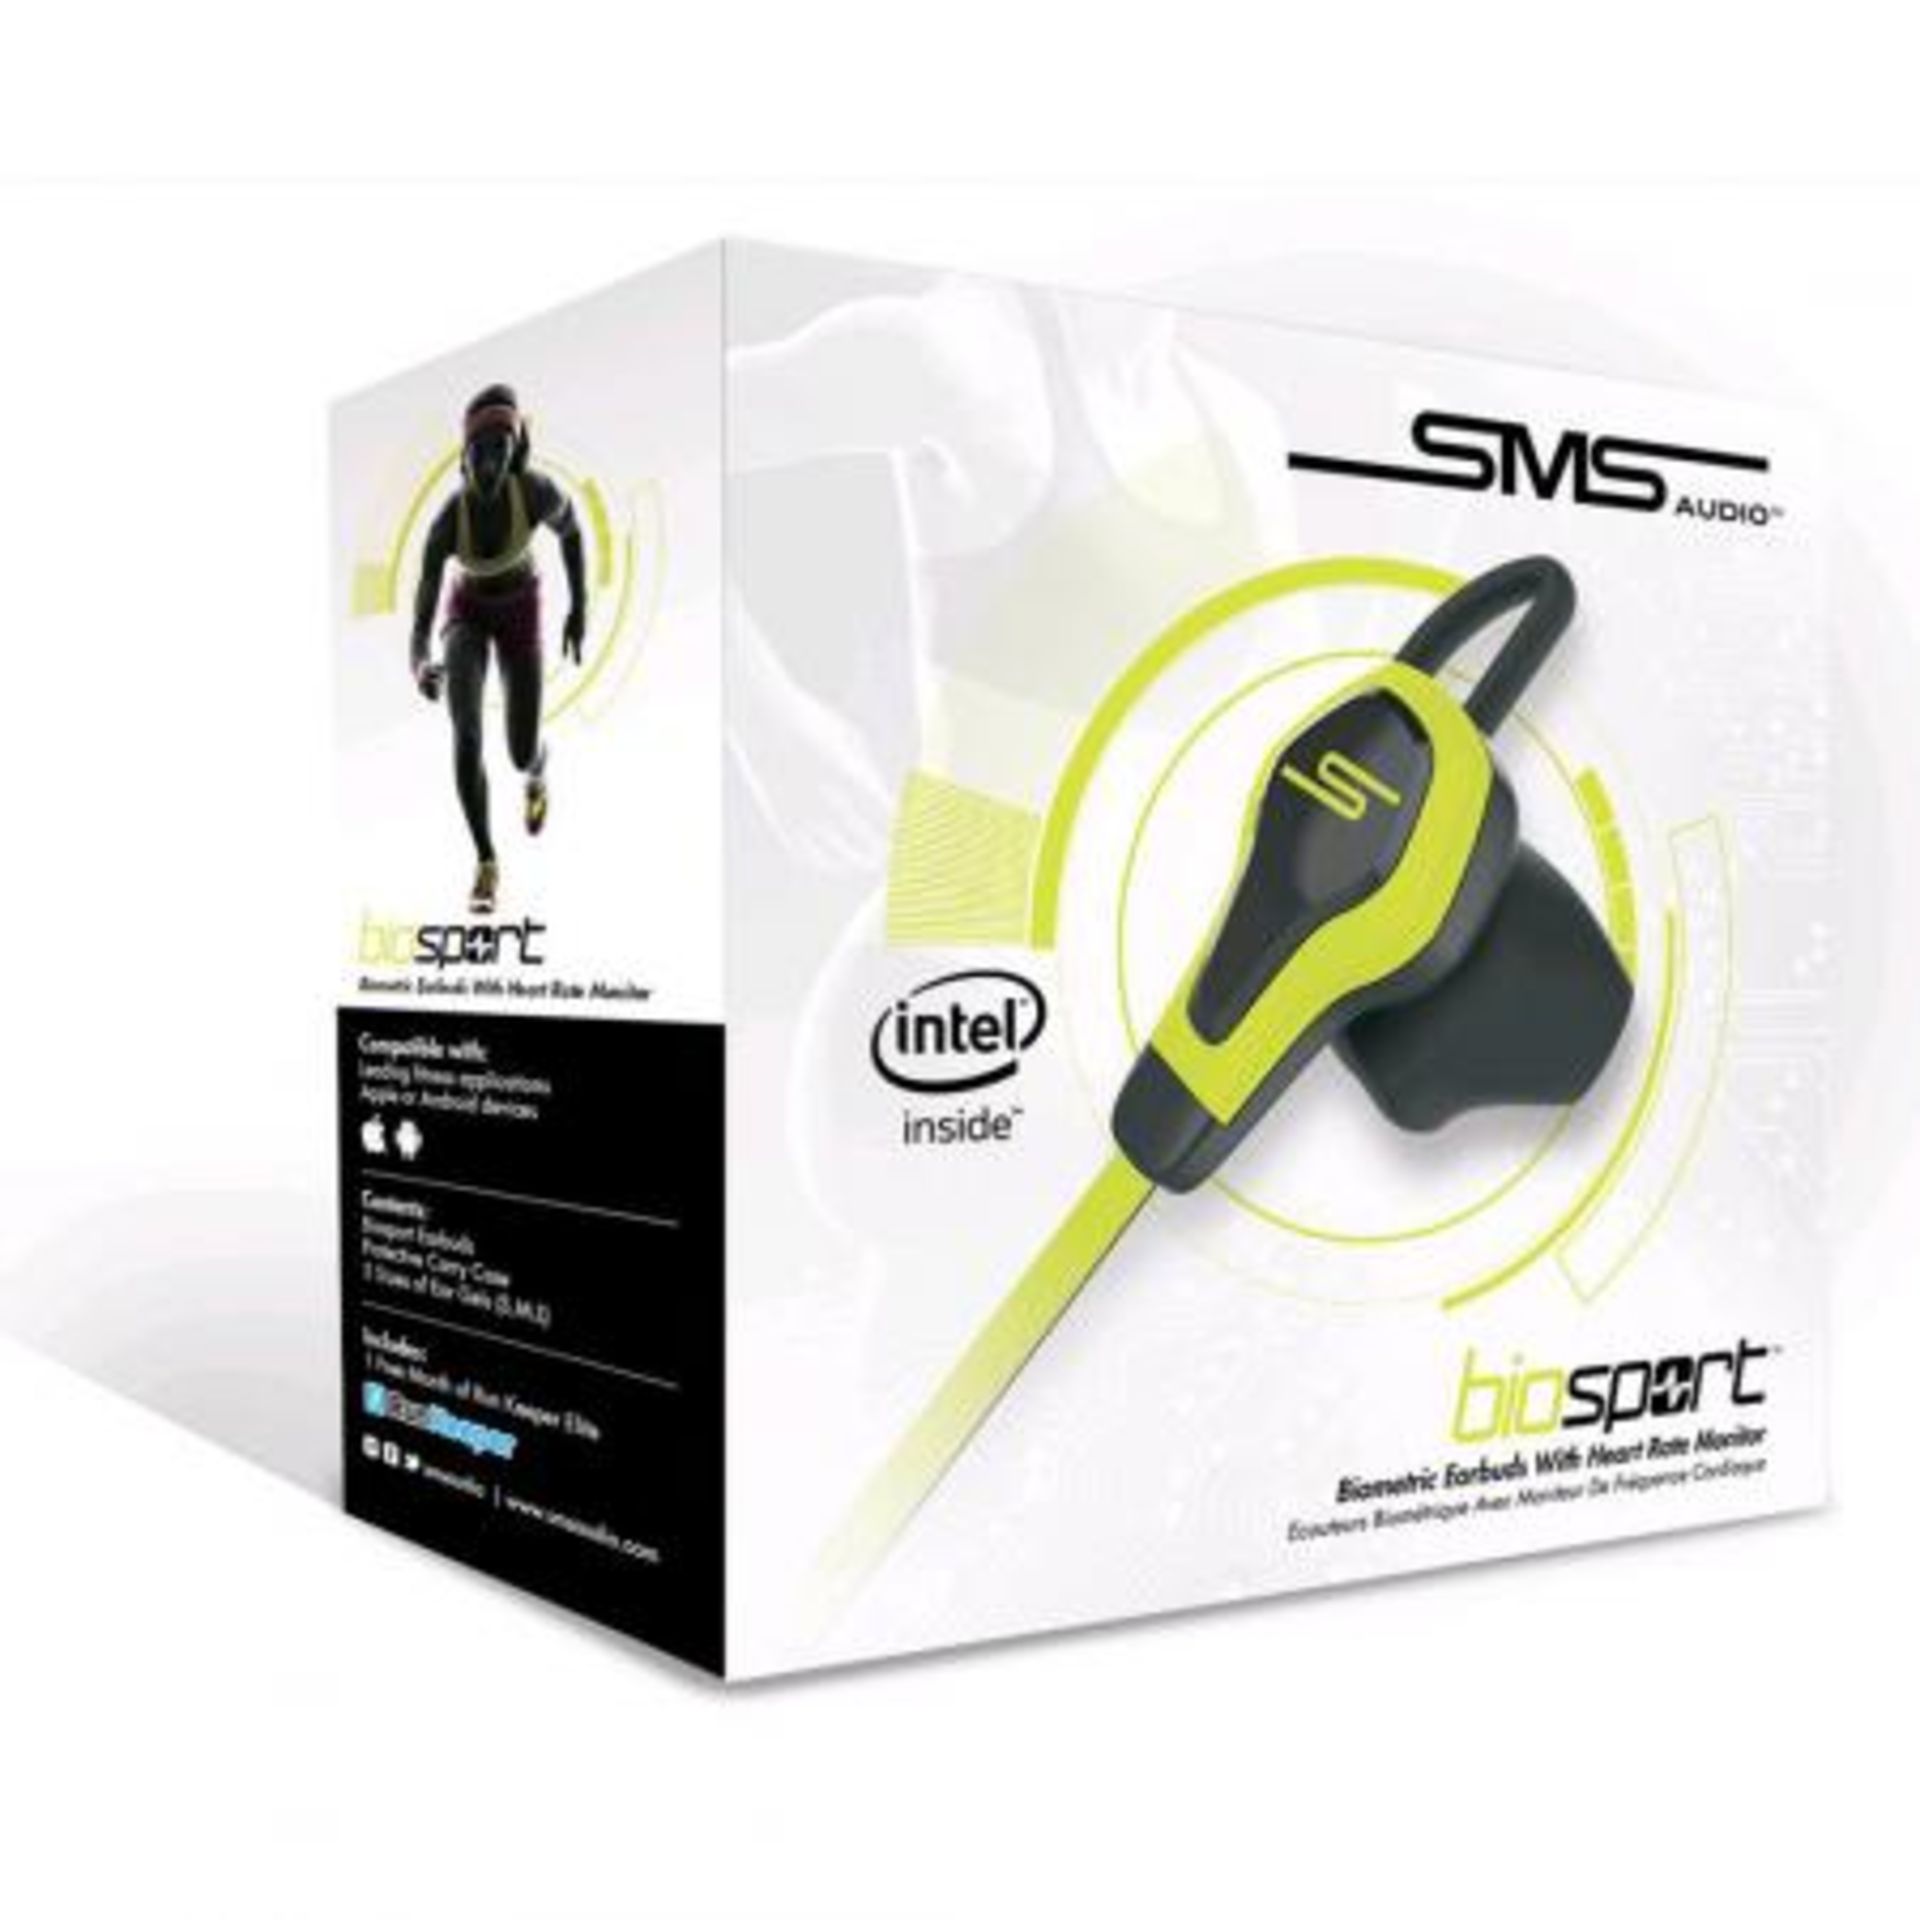 V Brand New SMS Audio BioSport Earphones - Heart Rate Monitor Measures Changes In Blood Flow - Smart